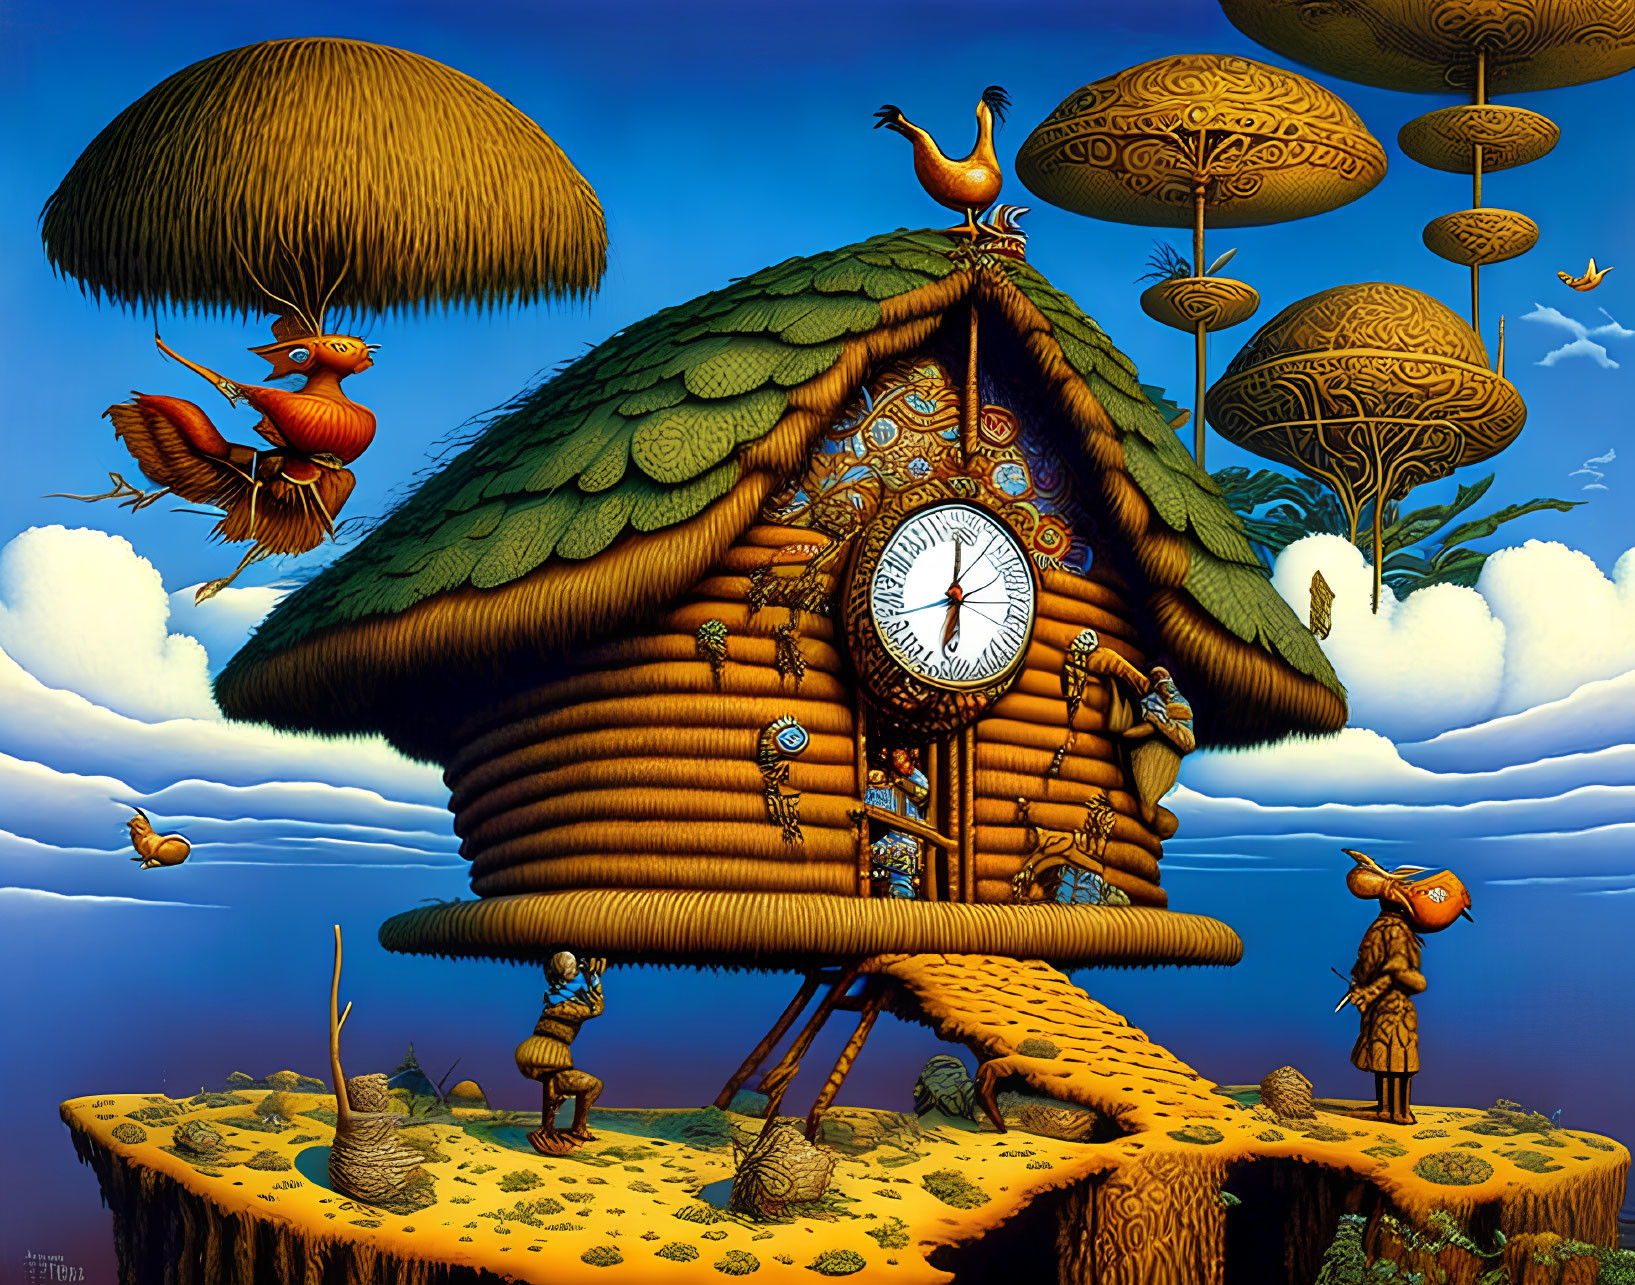 Surreal painting: clock-faced house, peacocks, anthropomorphic birds, floating islands